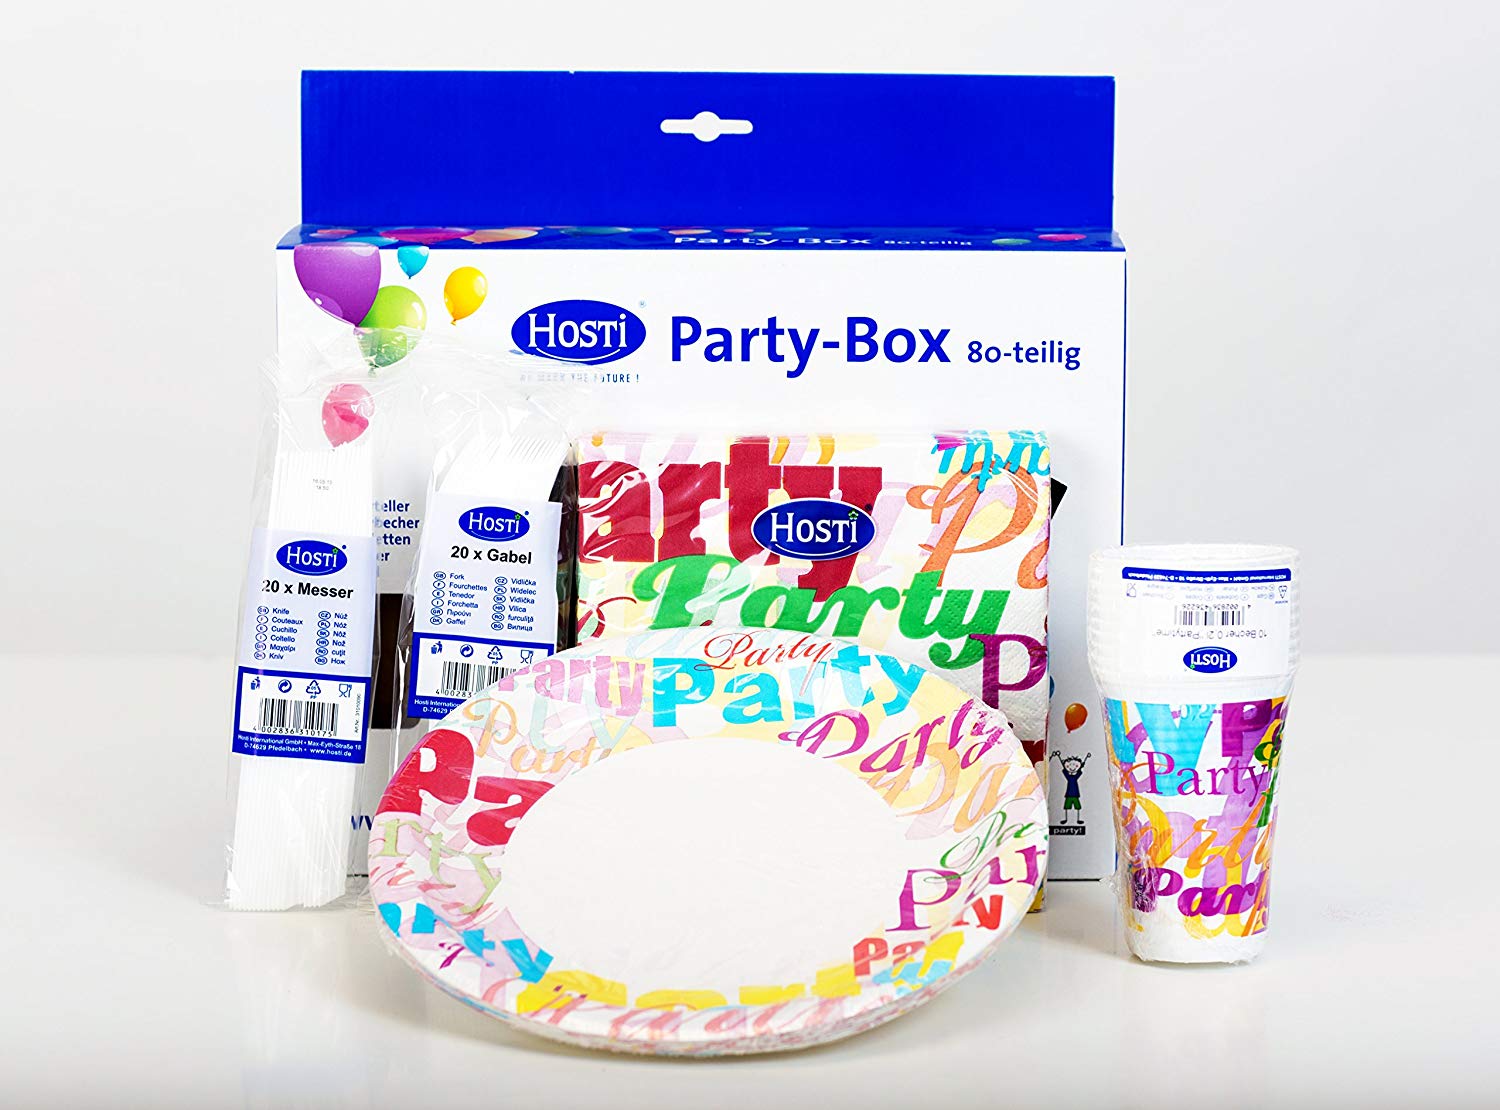 Partybox "Party Time"